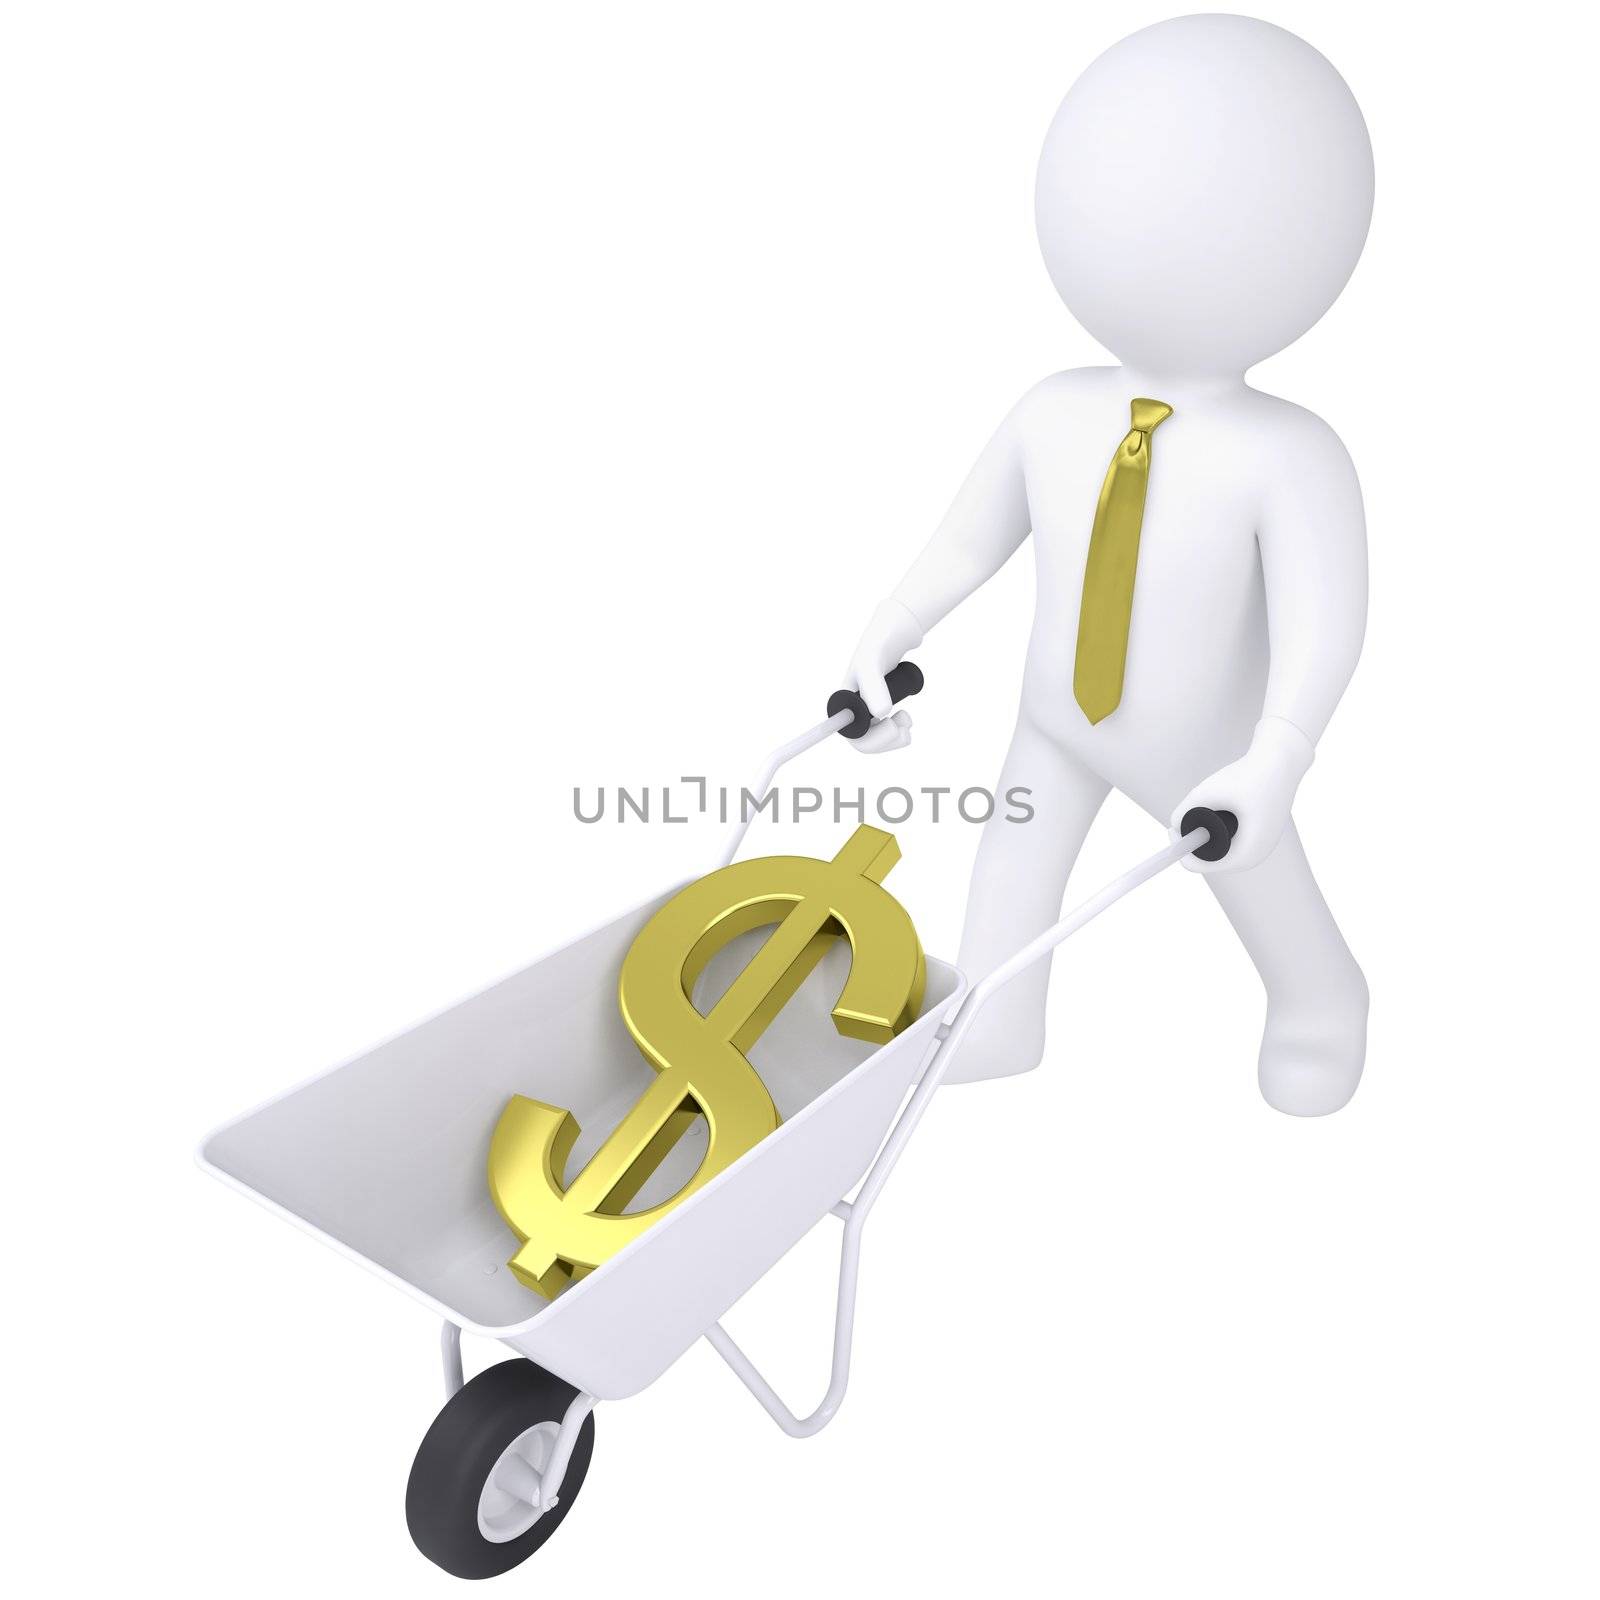 3d white man carries a wheelbarrow with the euro. Isolated render on a white background